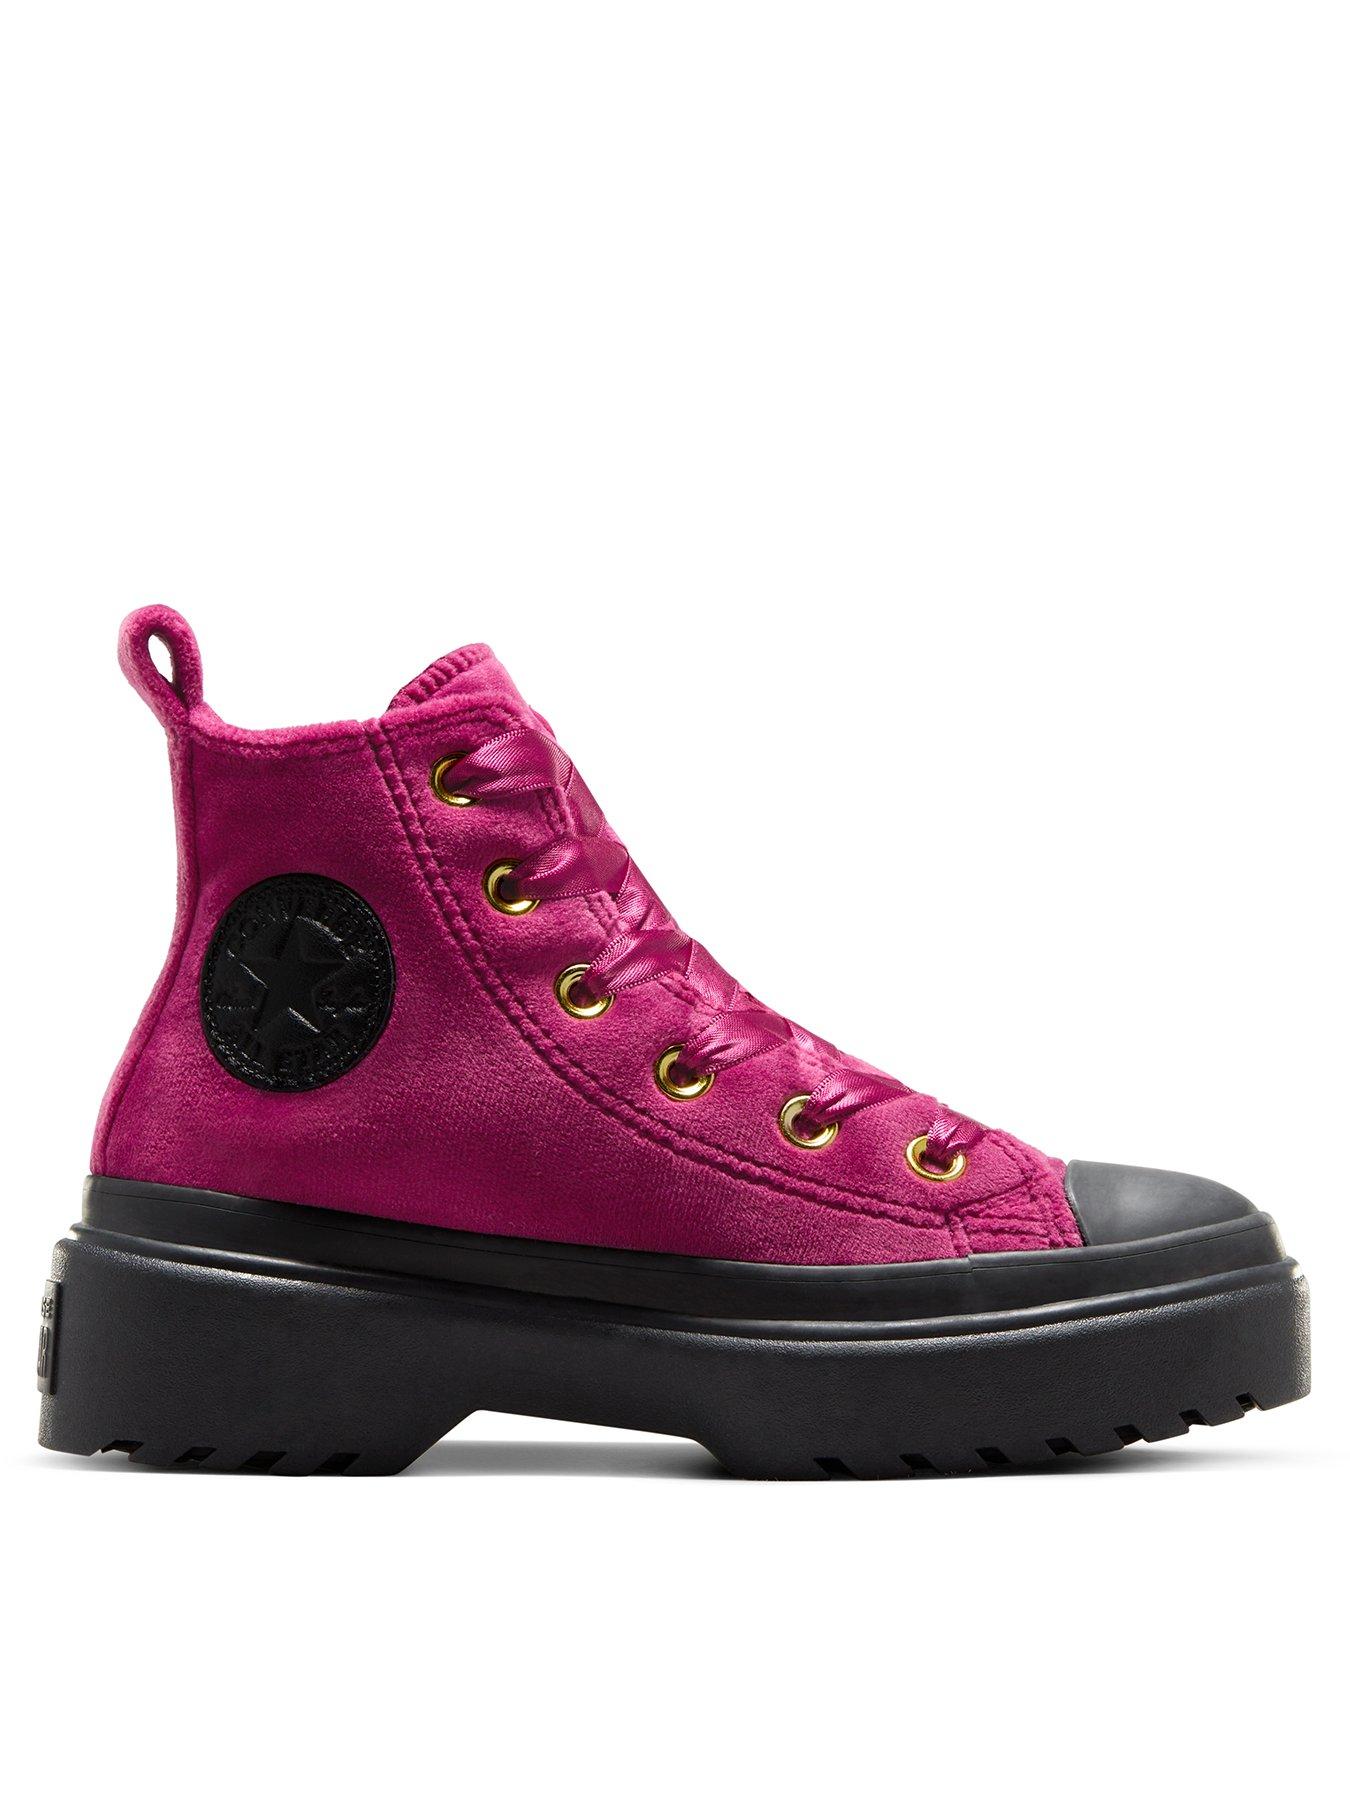 Converse Kids Lugged Lift Platform Velvet Trainers - Pink, Pink, Size 10 Younger